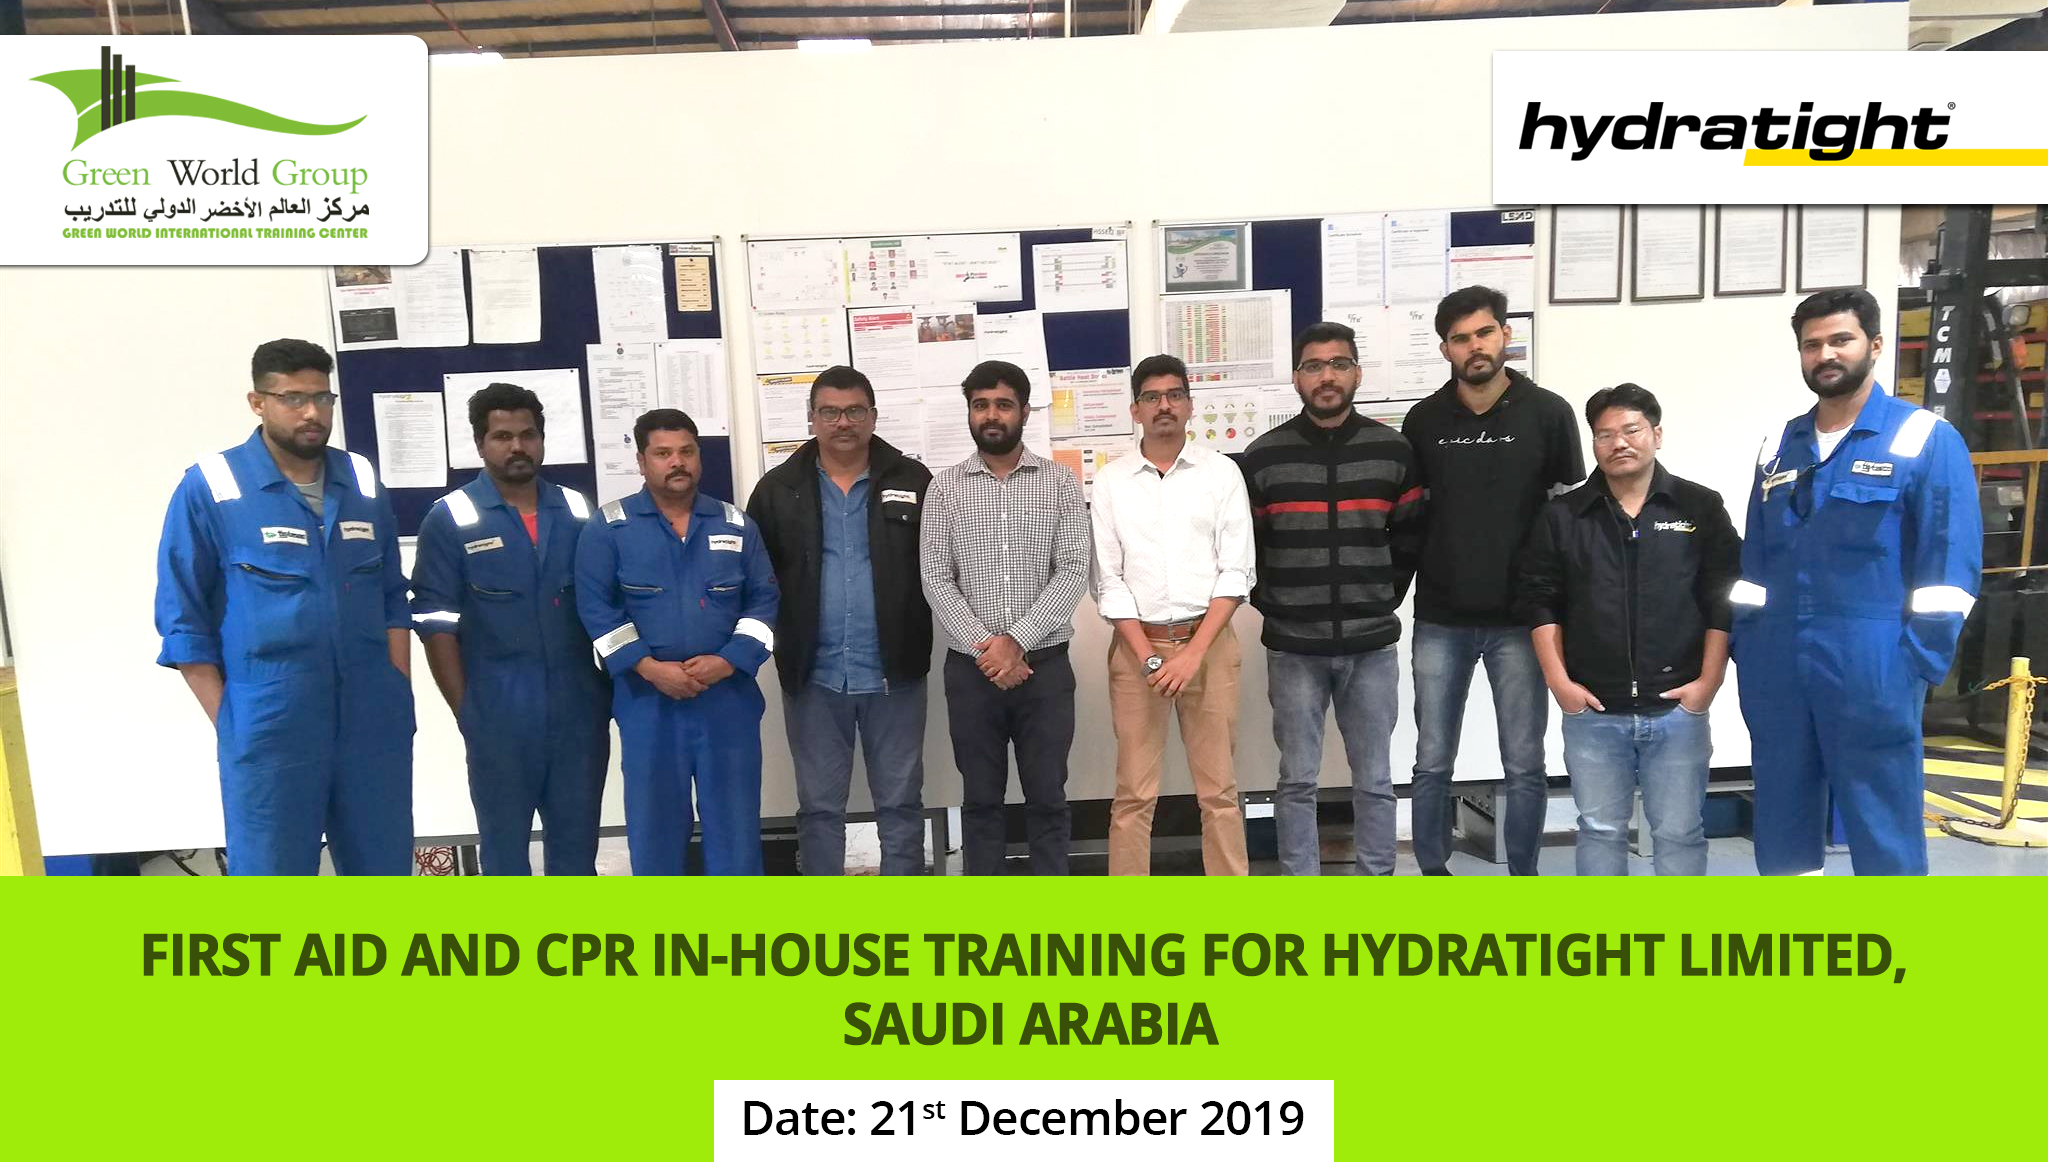 First Aid and CPR In-House Training for Hydratight Limited, Saudi Arabia